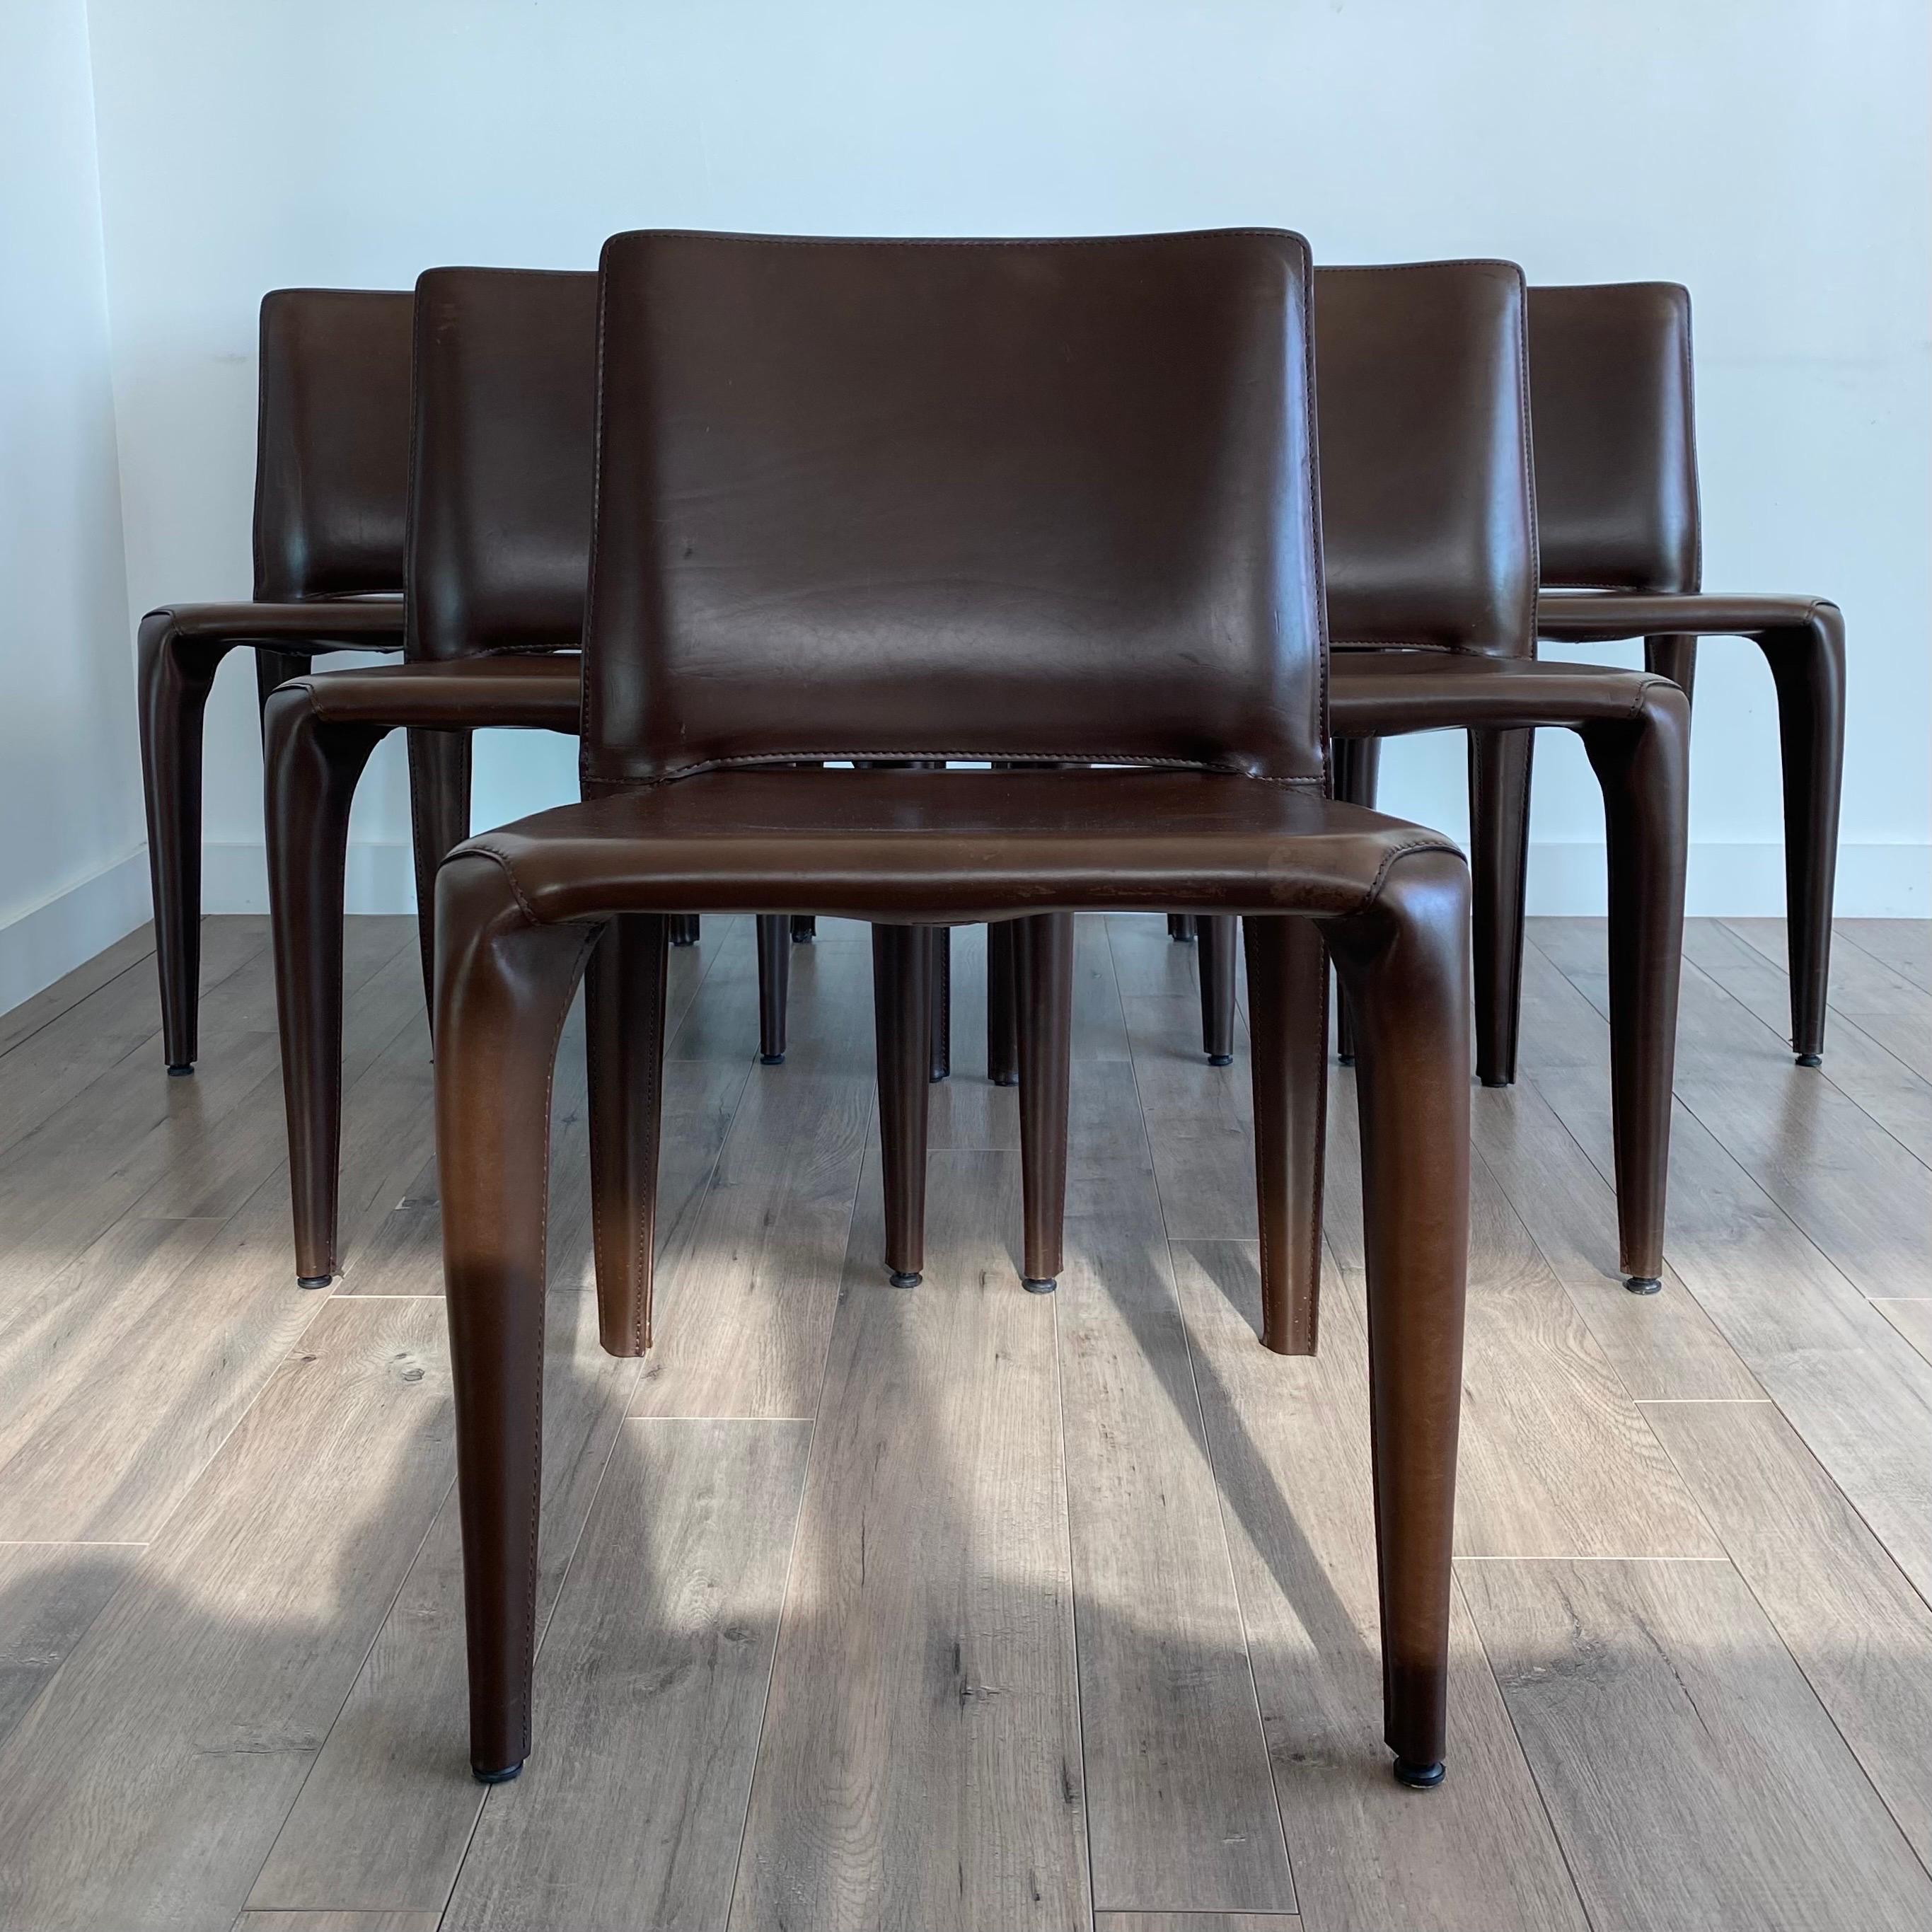 Sophisticated top-stitching outlines the contours of this elegant design chair demonstrating the successful fusion of artisan craftsmanship and industrial production, also found in the curved edges that allow the chairs to be stacked for a